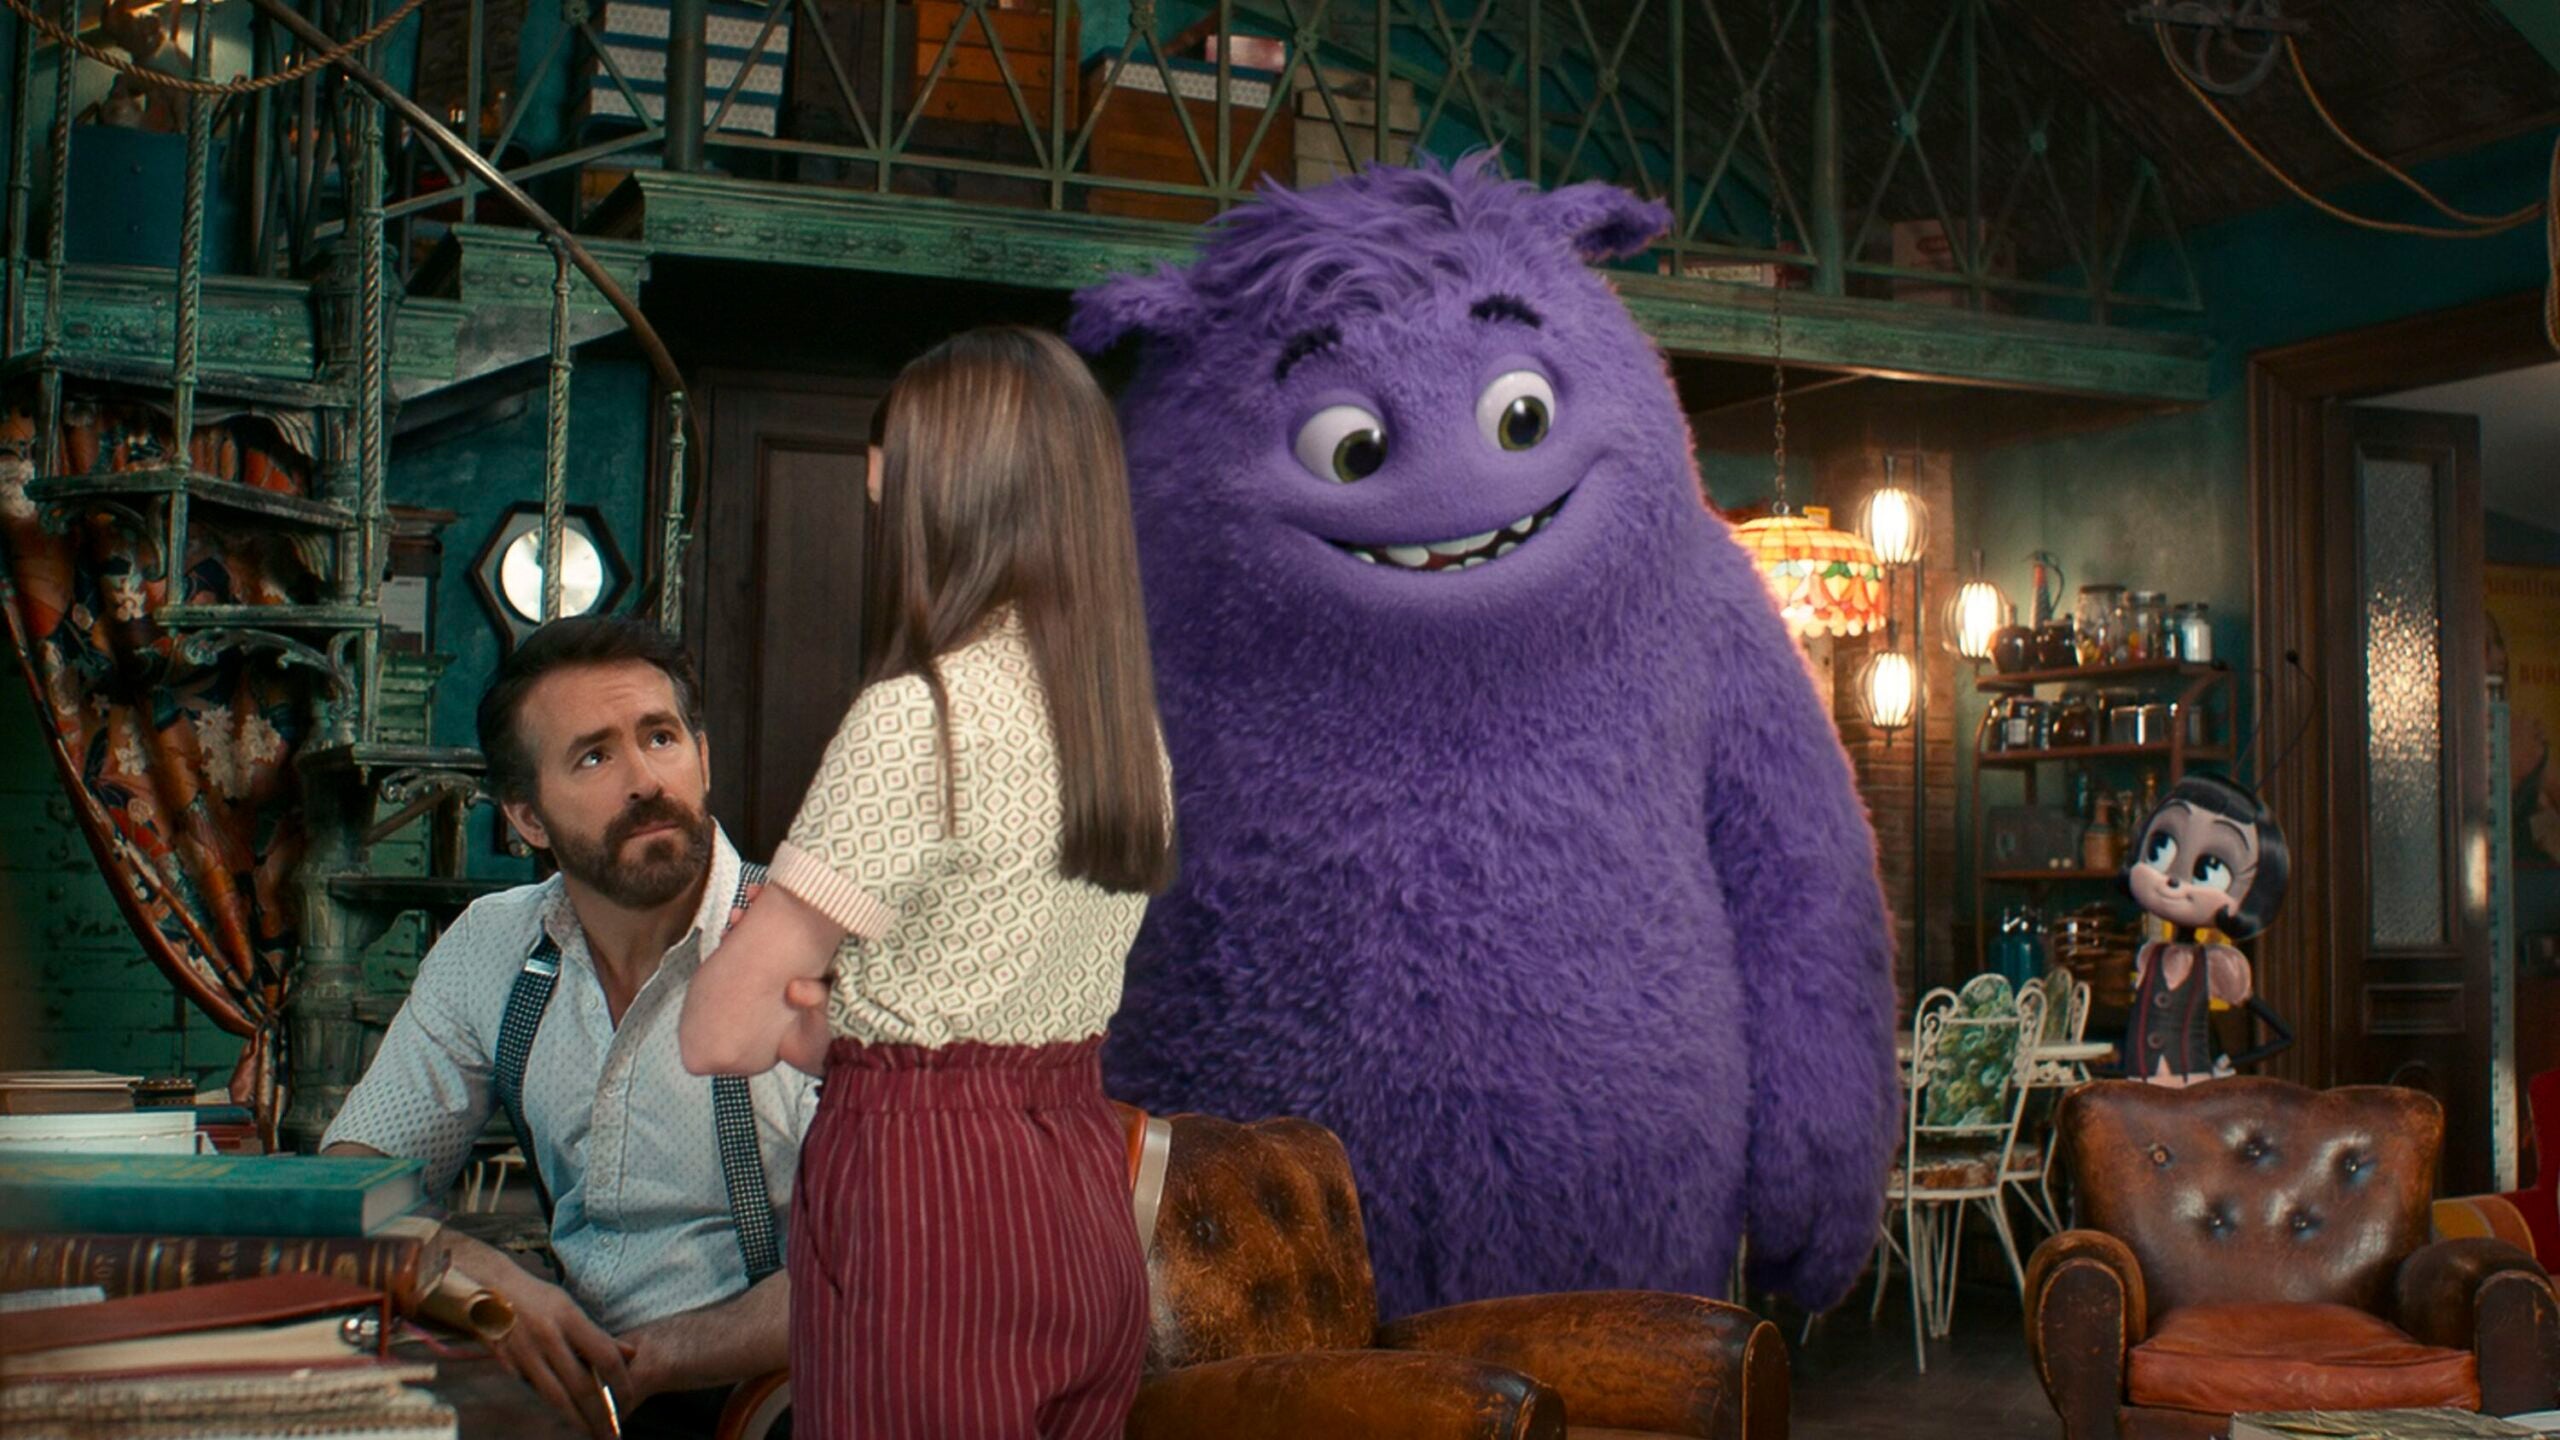 From left: Ryan Reynolds, Cailey Fleming, the character Blue (voiced by Steve Carell), and Blossom (voiced by Phoebe Waller-Bridge) in a scene from "IF."